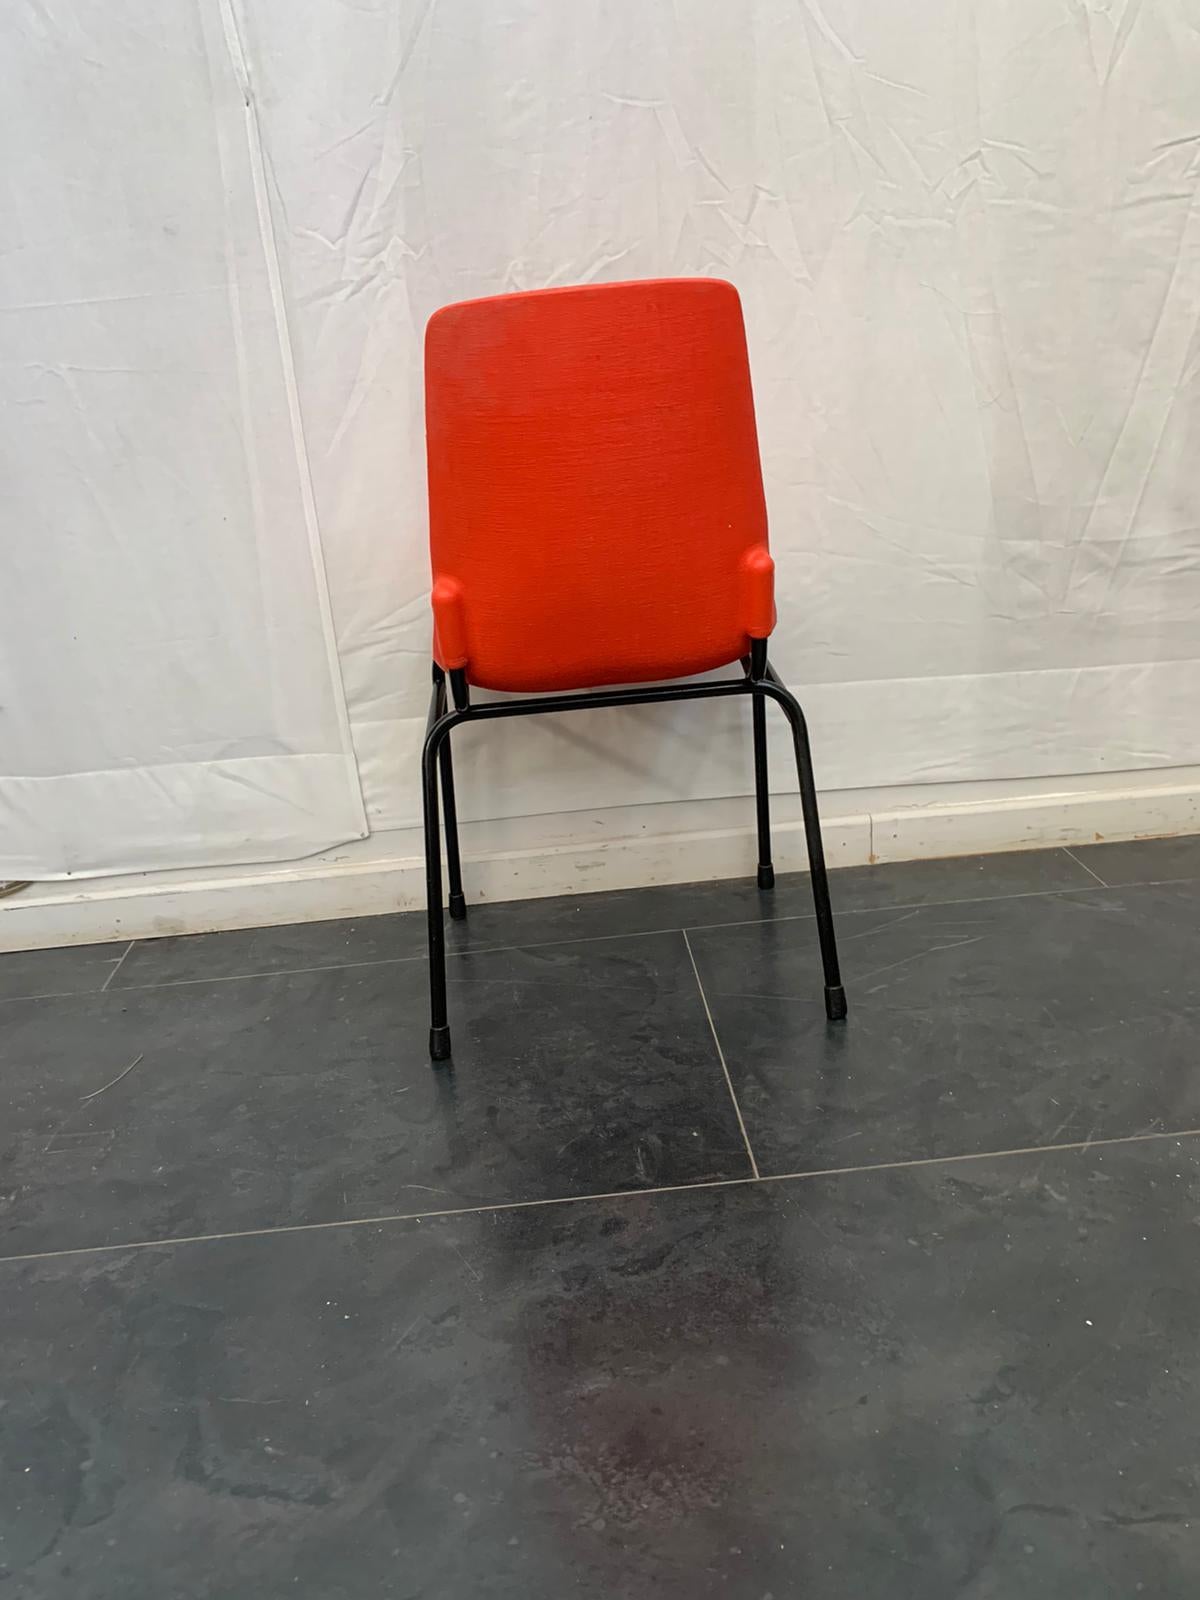 Woven Plastic and Metal Frame Fantasia Chair, 1960s For Sale 3